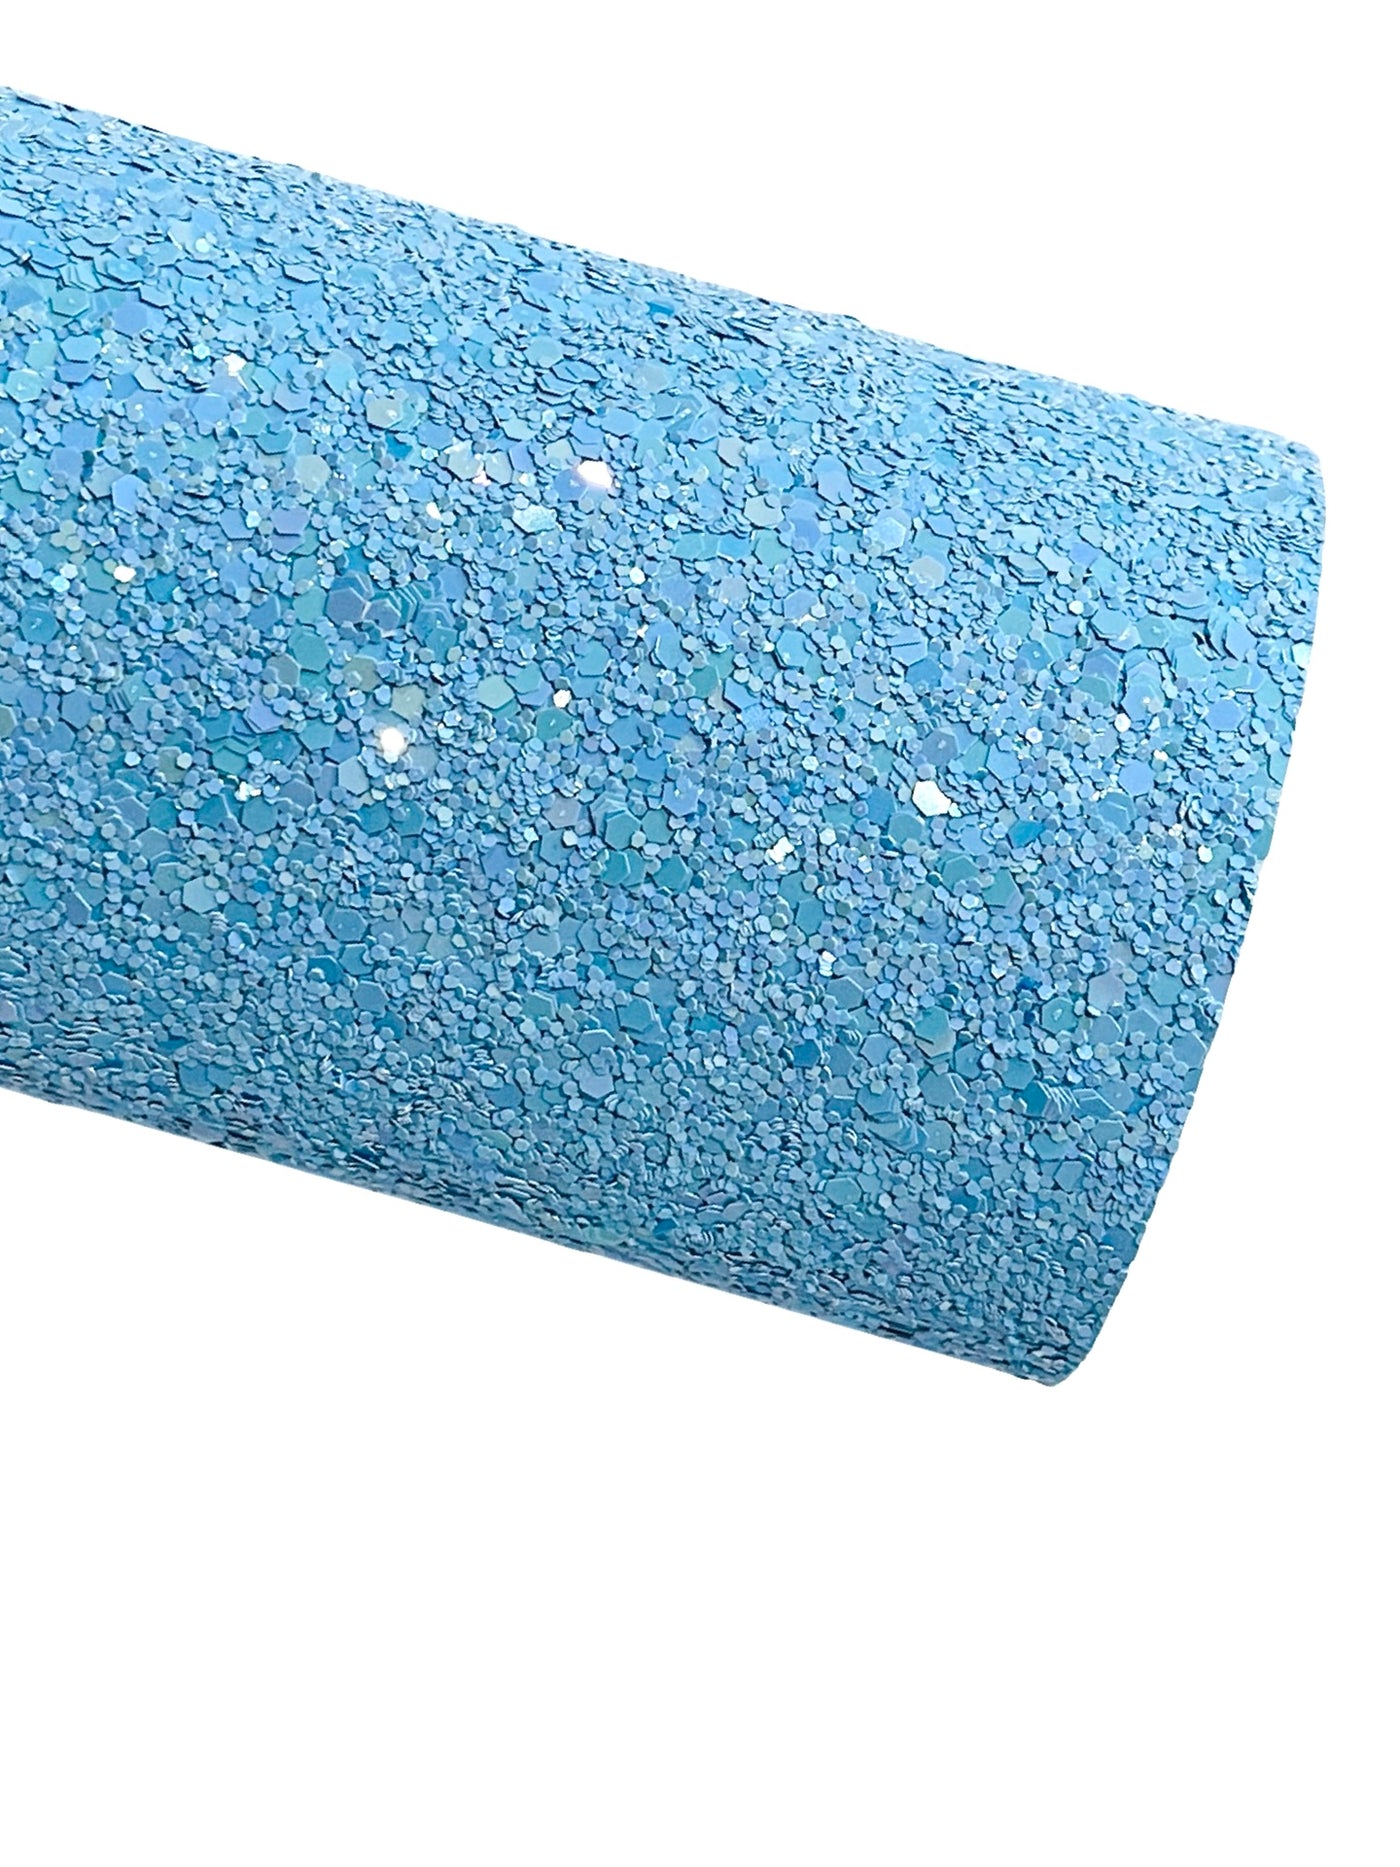 Princess Blue Glitter Fabric - now with white felt rear